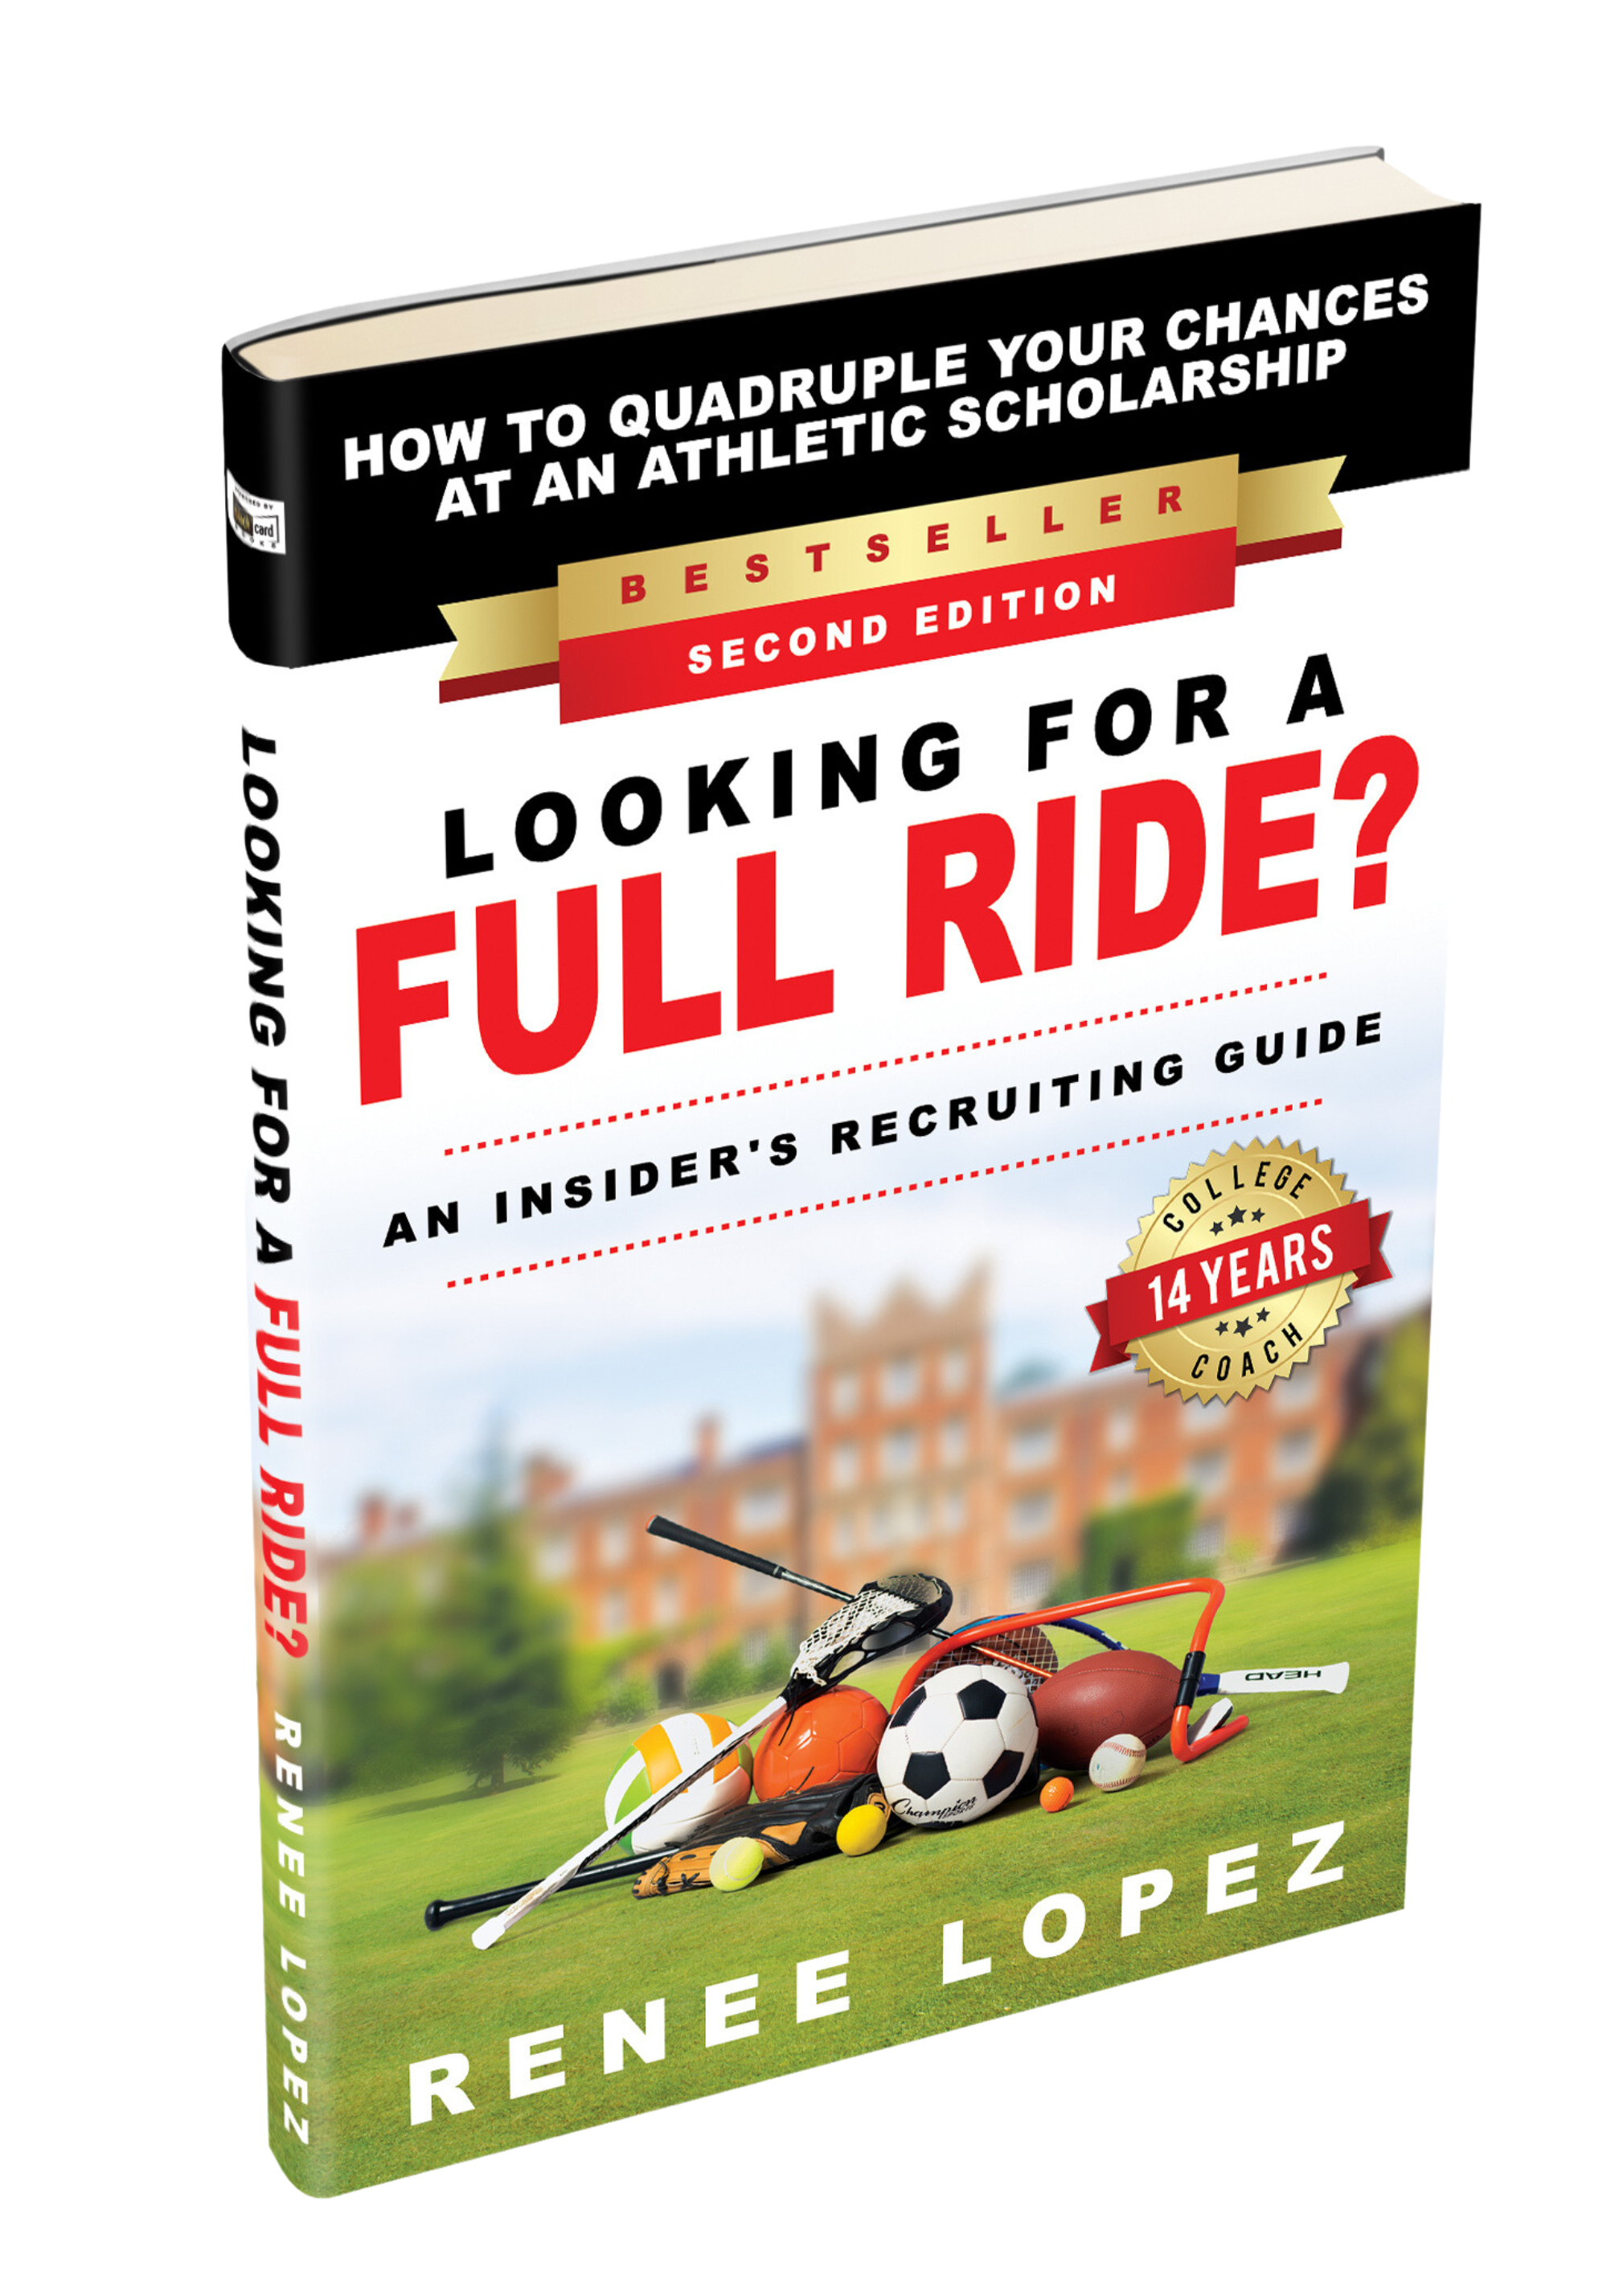 Book 'Looking for a Full Ride?' by Coach Renee Lopez Book Cover